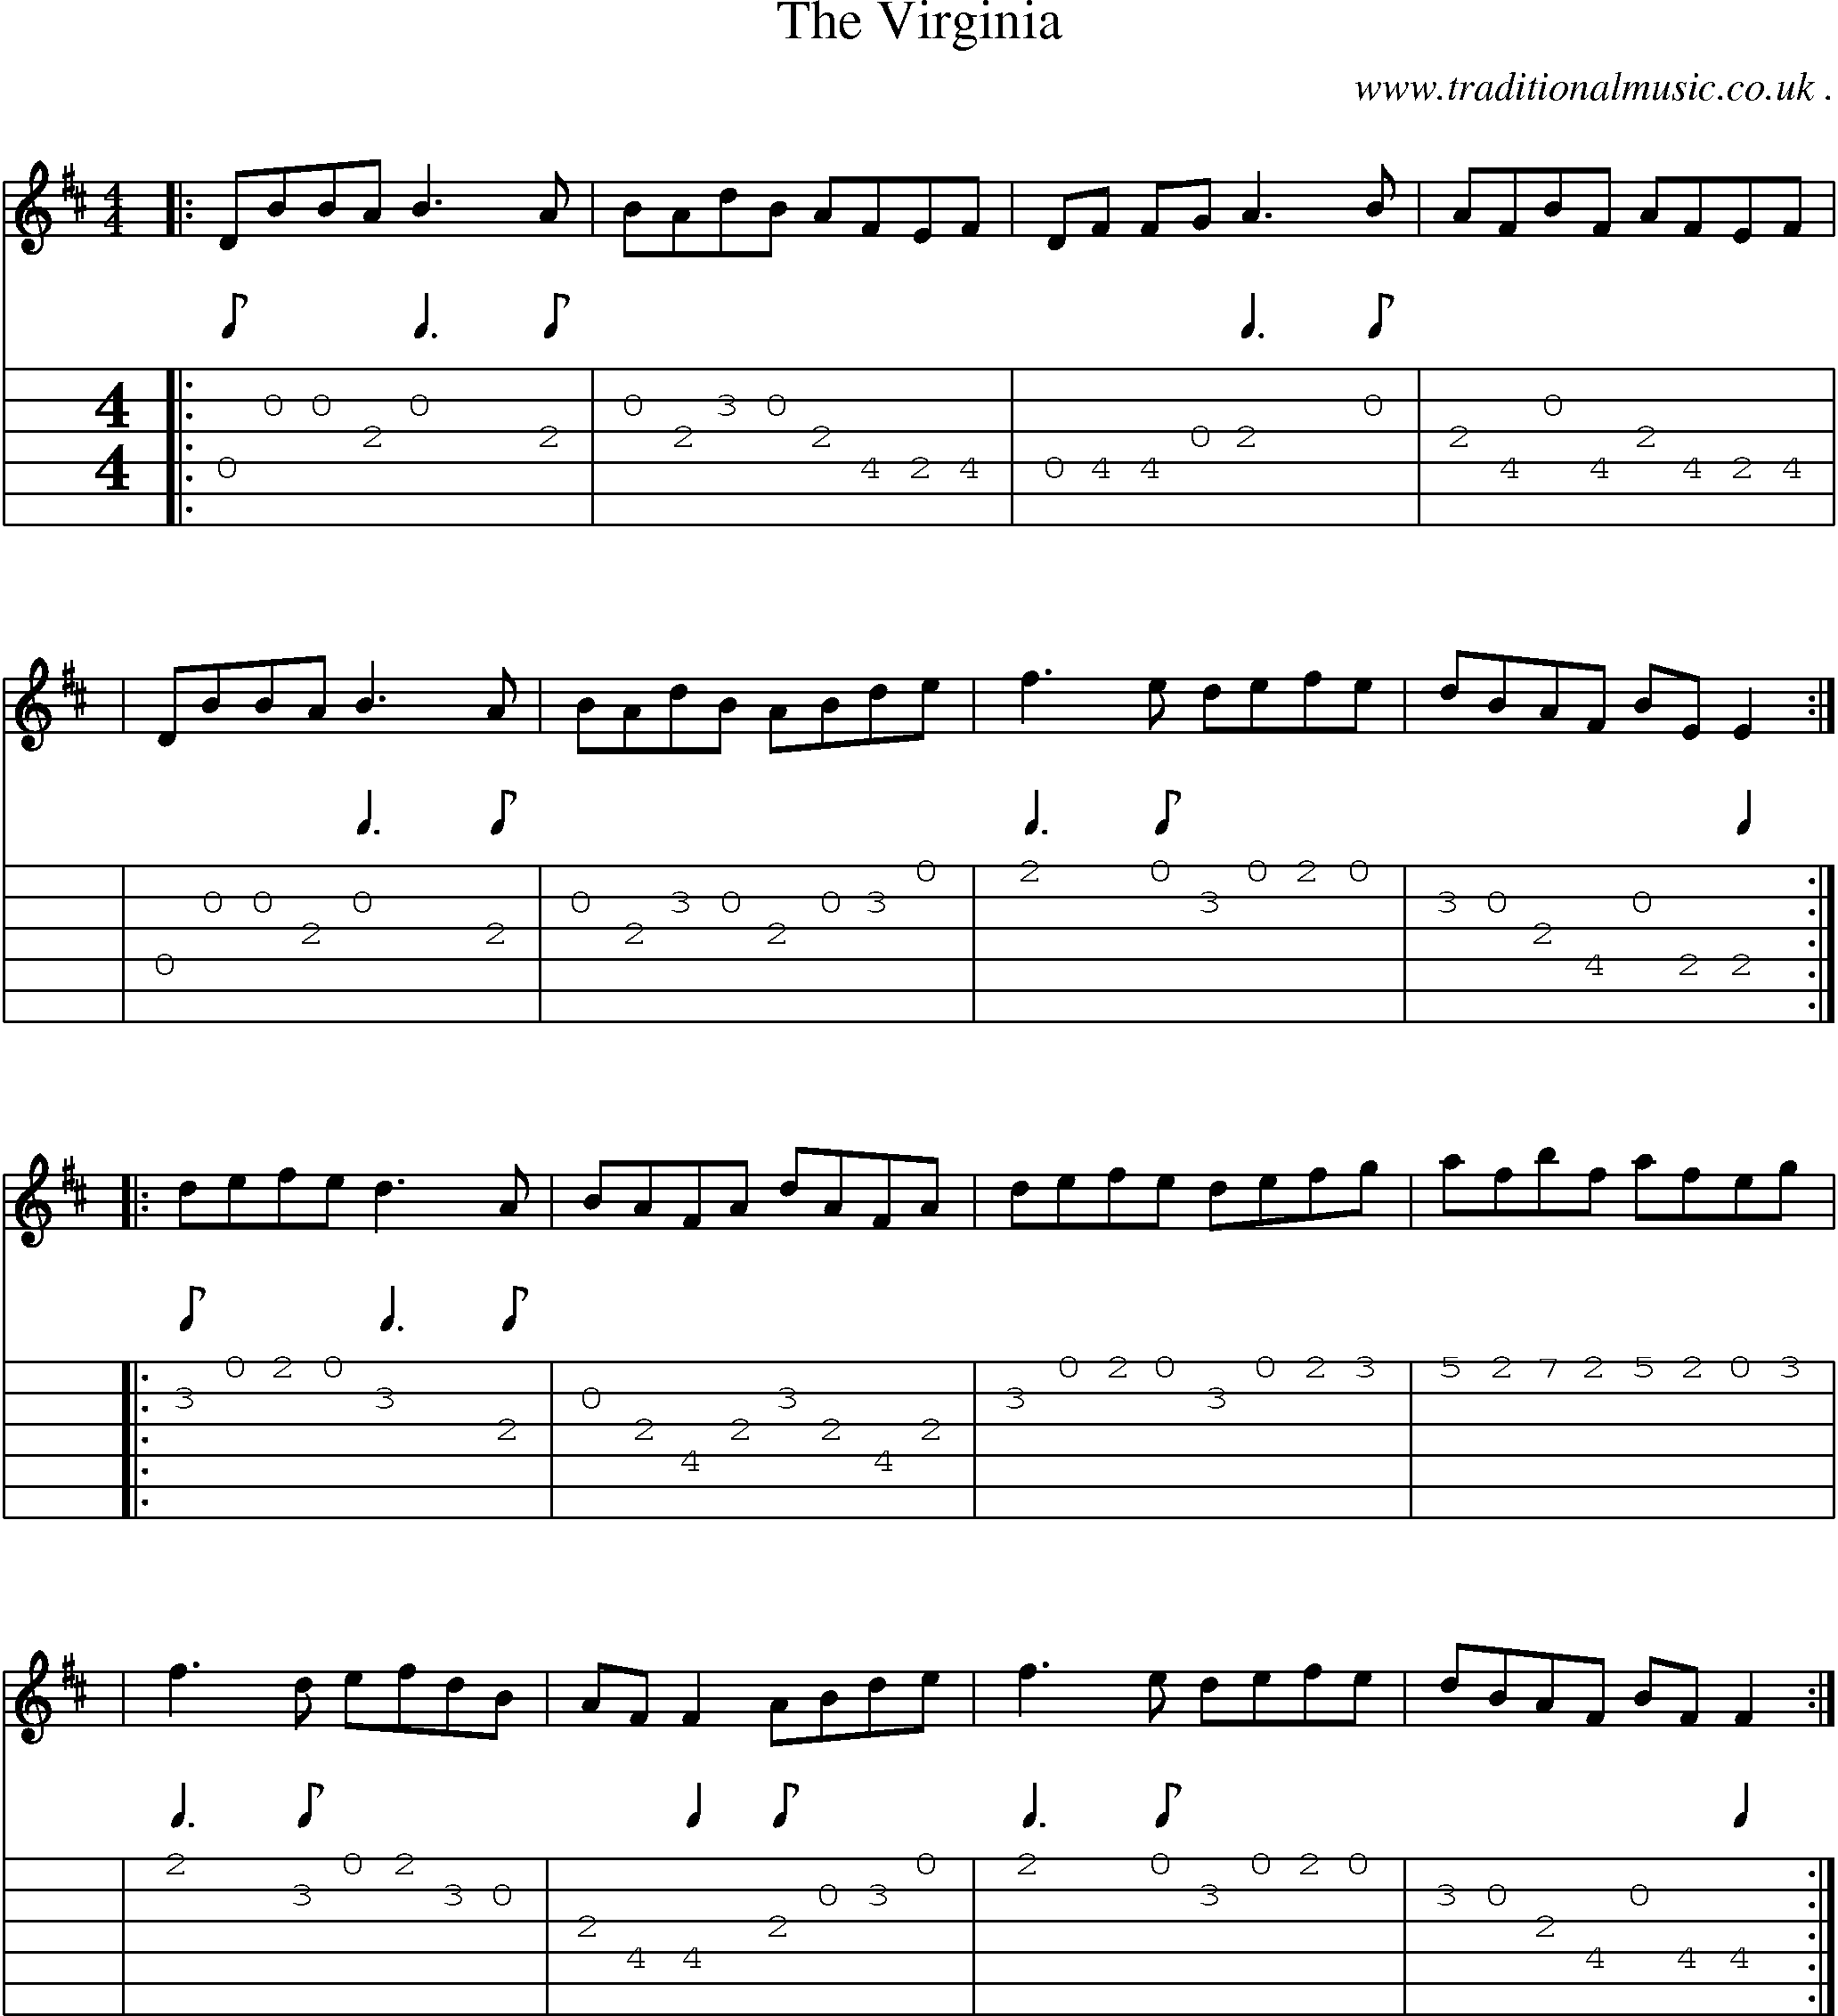 Sheet-Music and Guitar Tabs for The Virginia